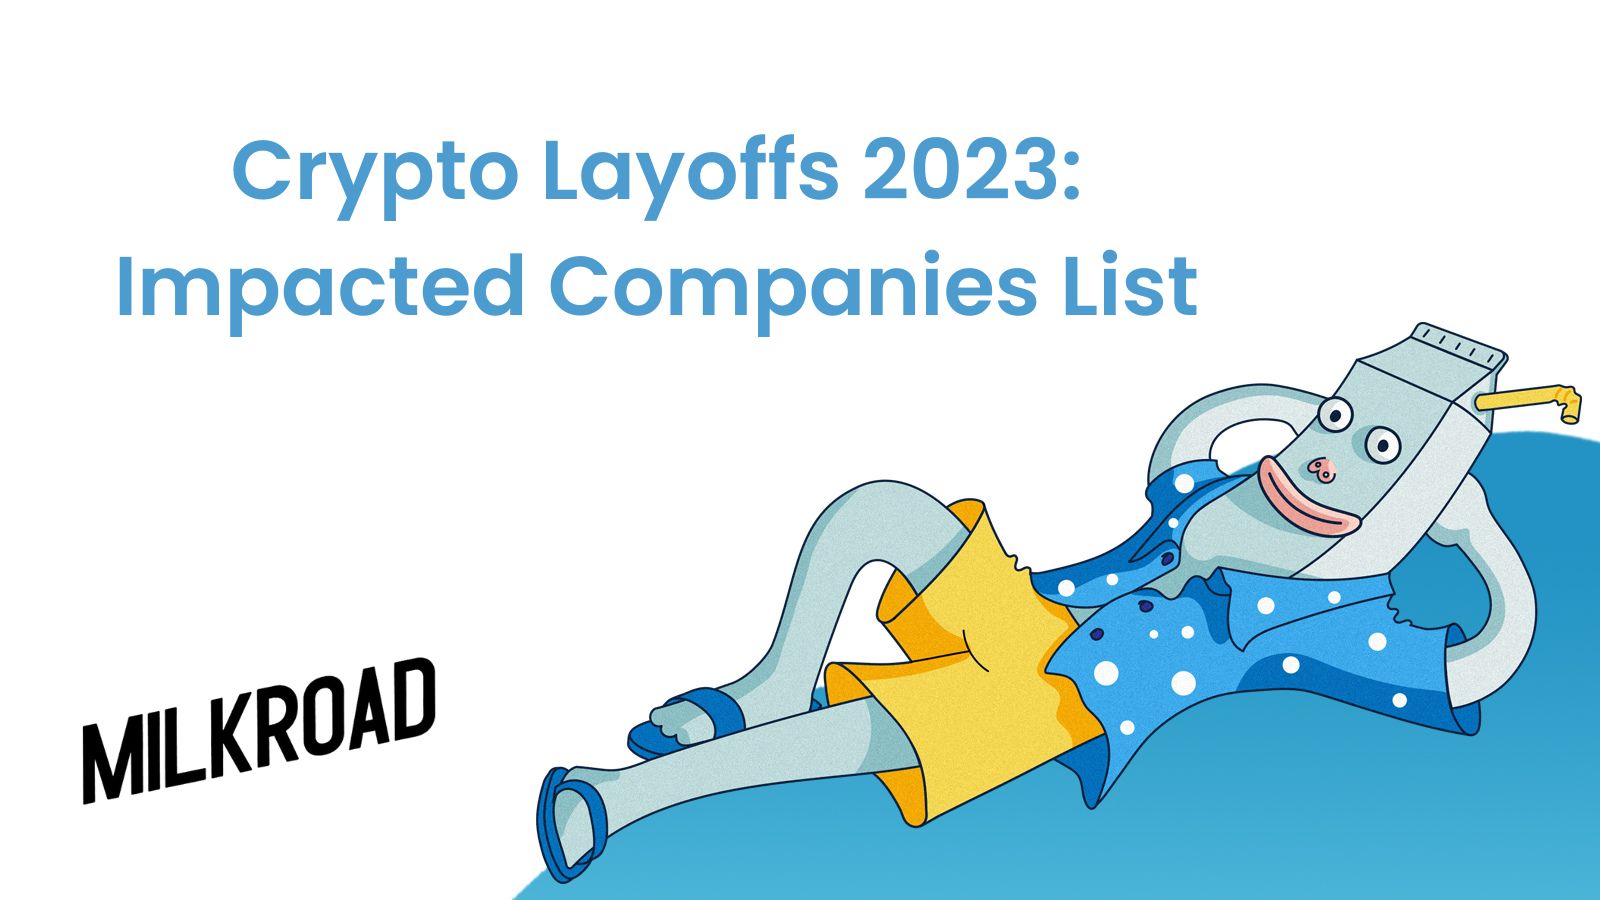 Crypto Layoffs 2023 Impacted Companies List